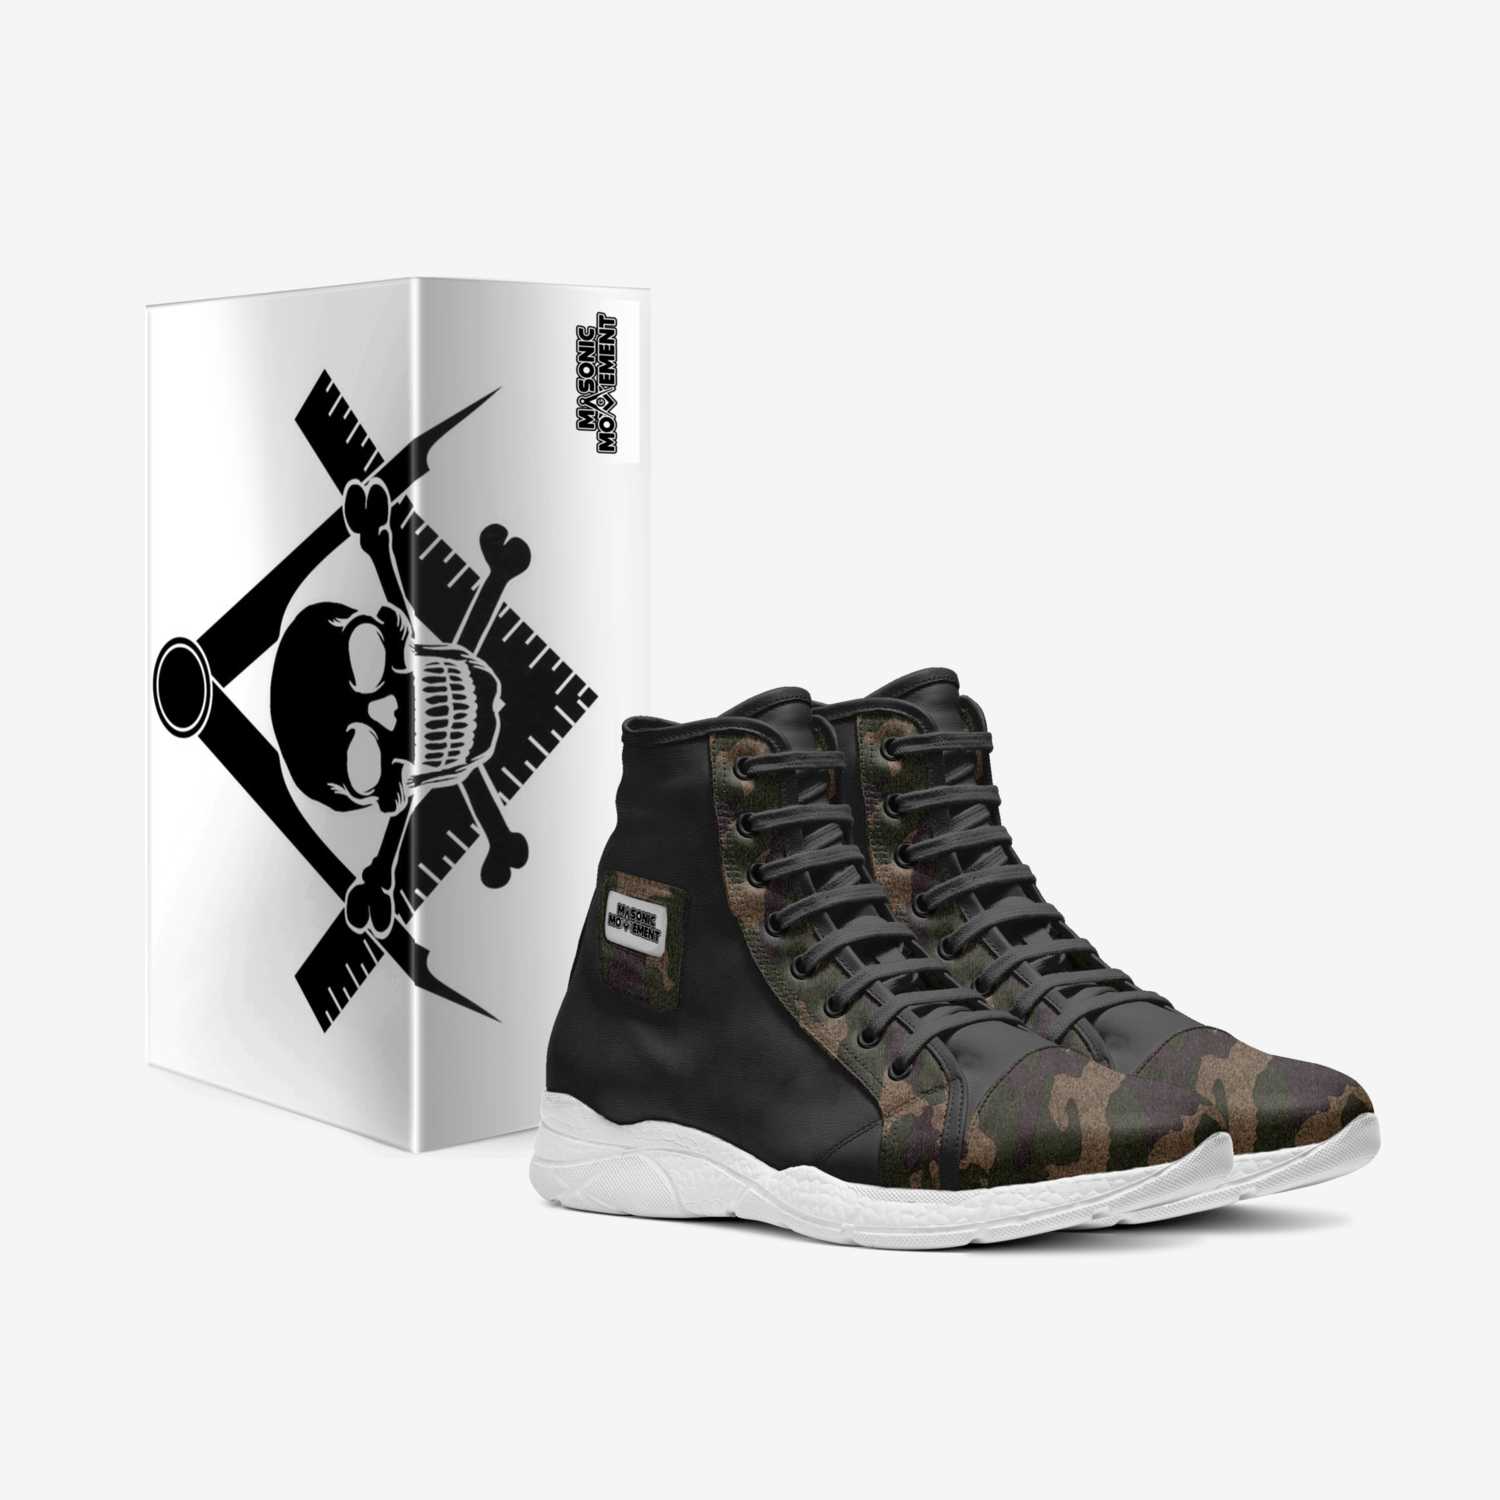 Masonic Movement custom made in Italy shoes by James Thomas | Box view